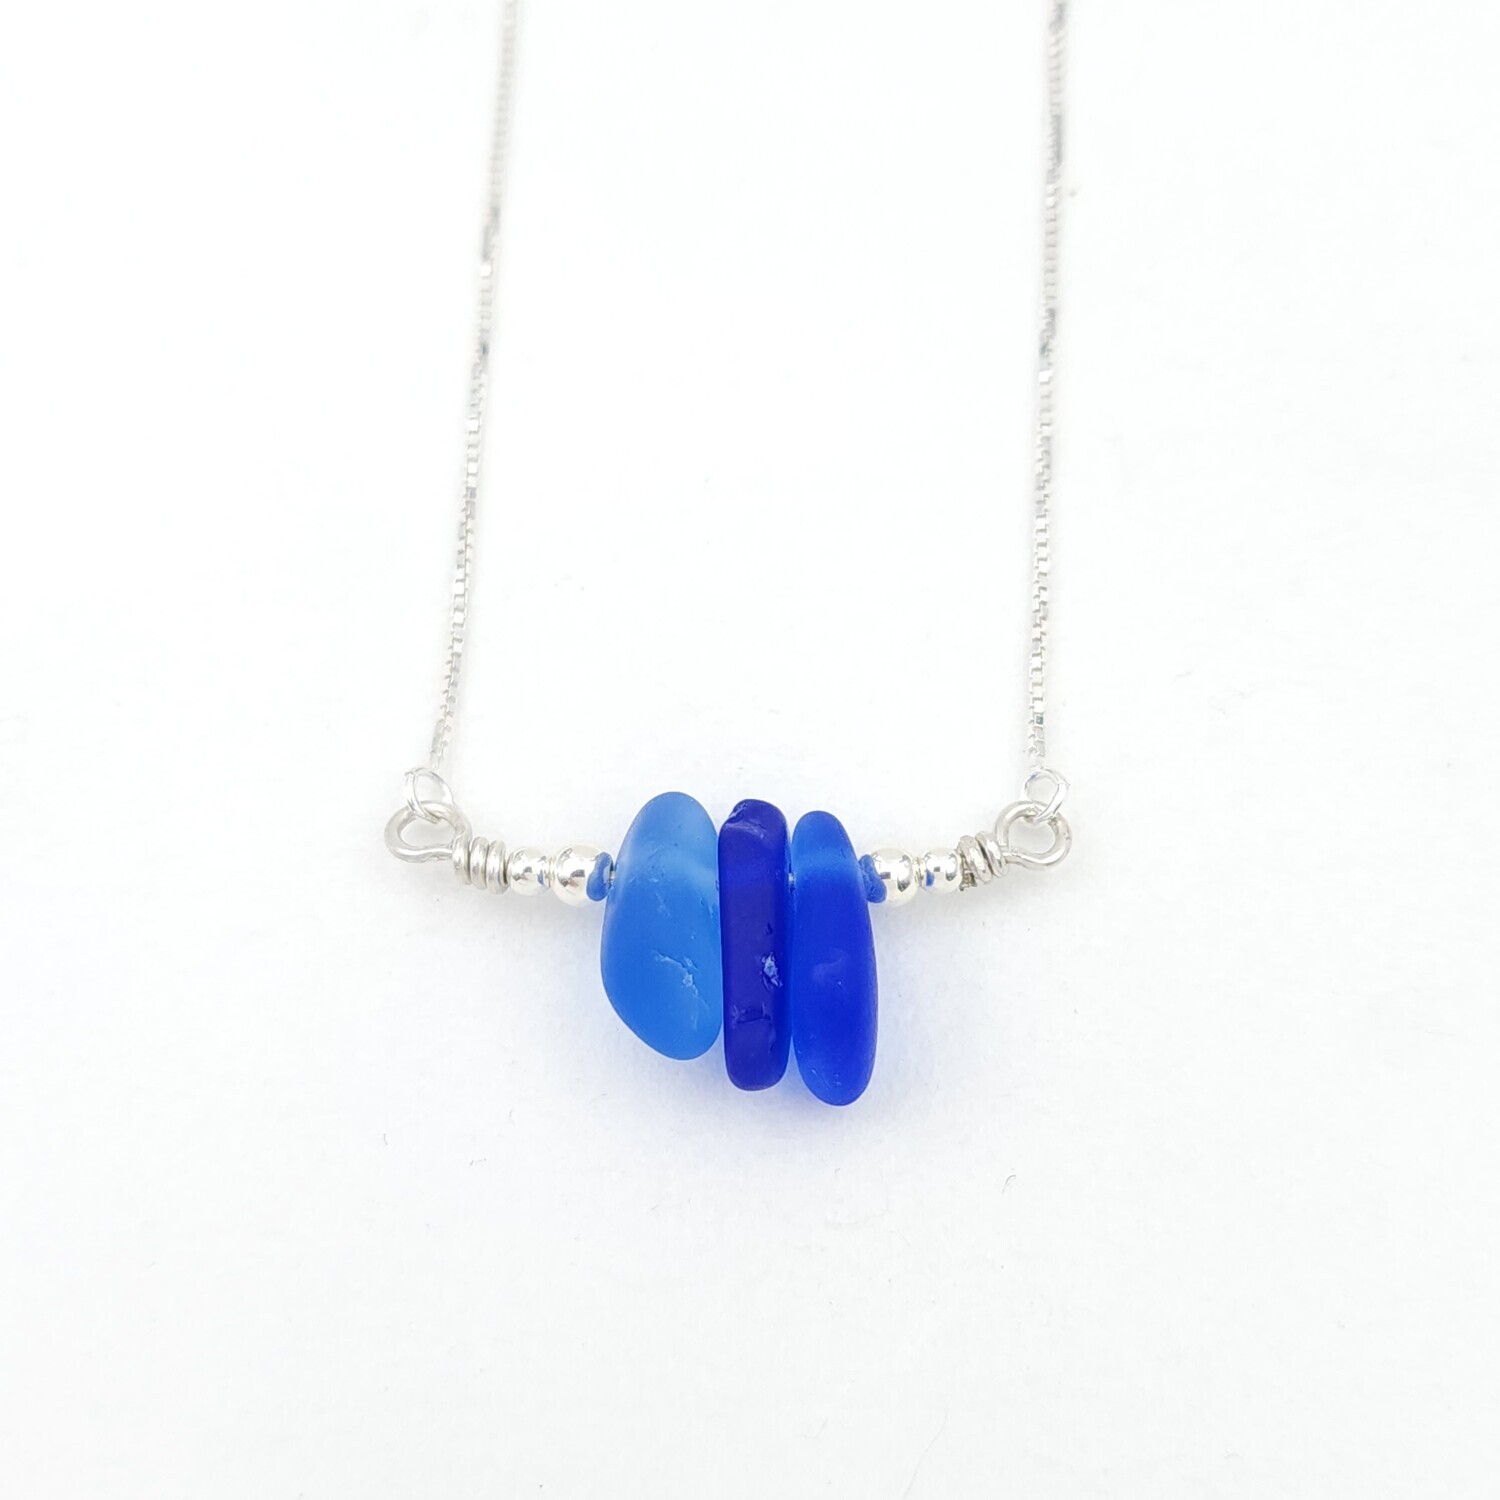 Shades of Blue Lake Erie Beach Glass Bar Necklace with Sterling Silver Beads